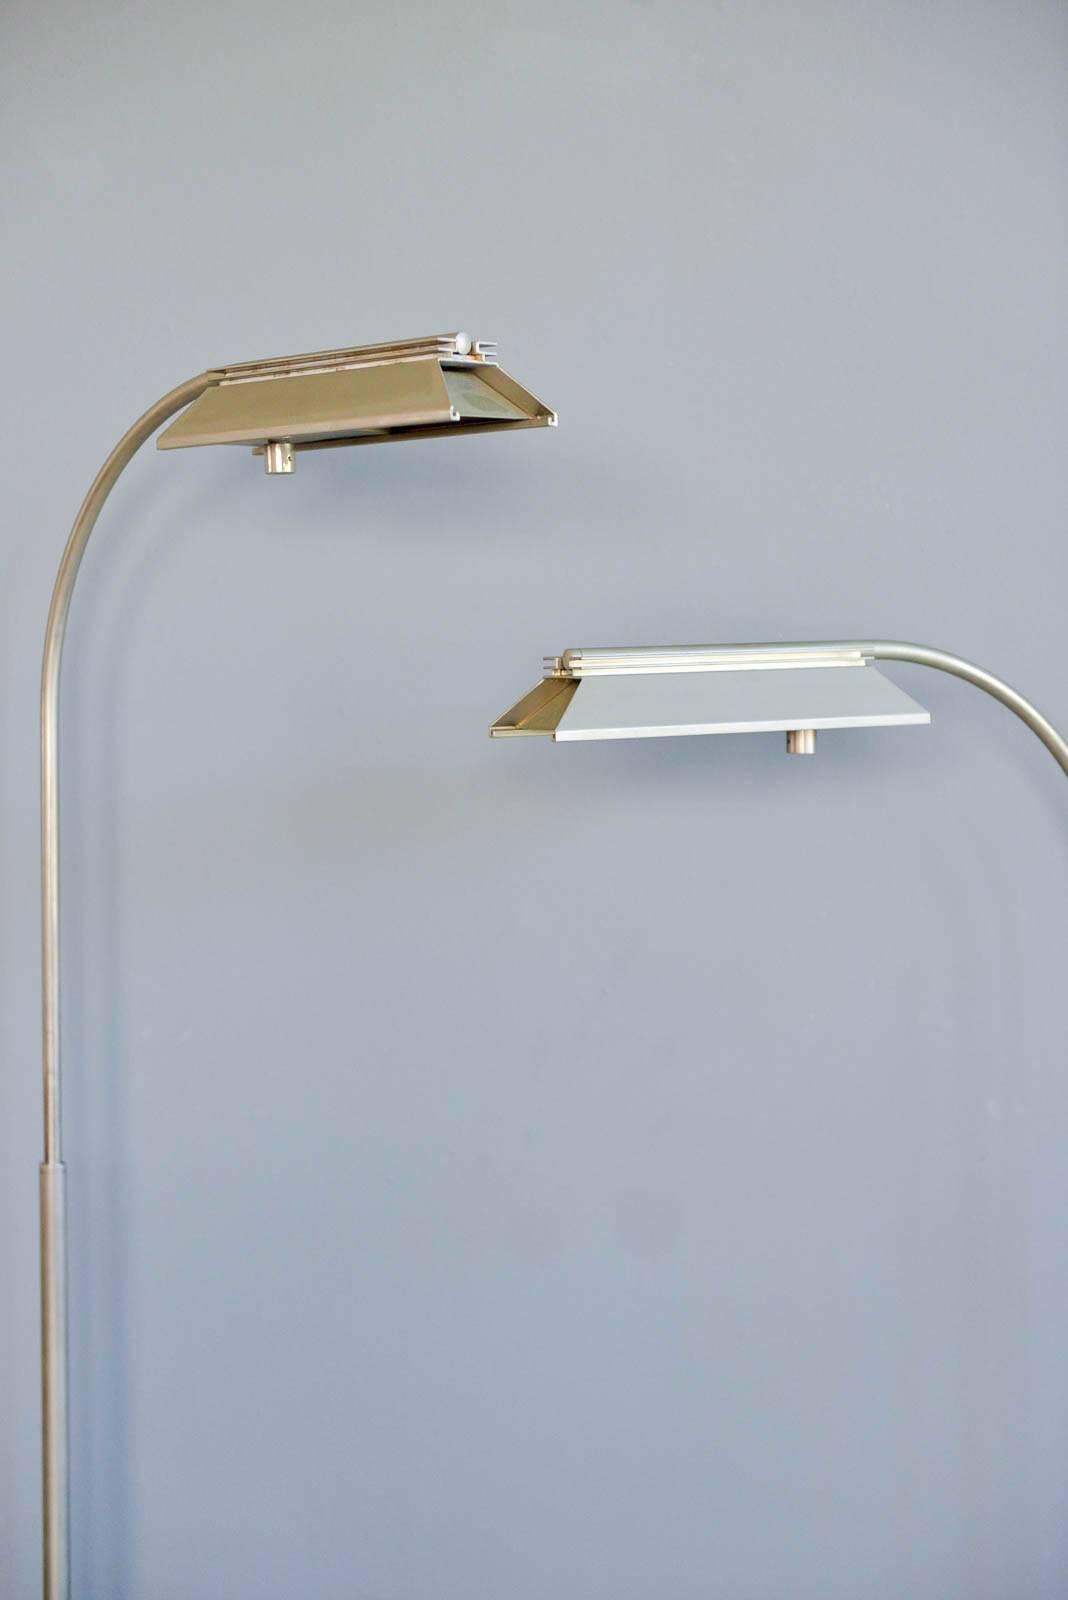 Mid-Century Modern Pair of Brushed Nickel Adjustable Dimmable Floor Lamps by Casella, circa 1970